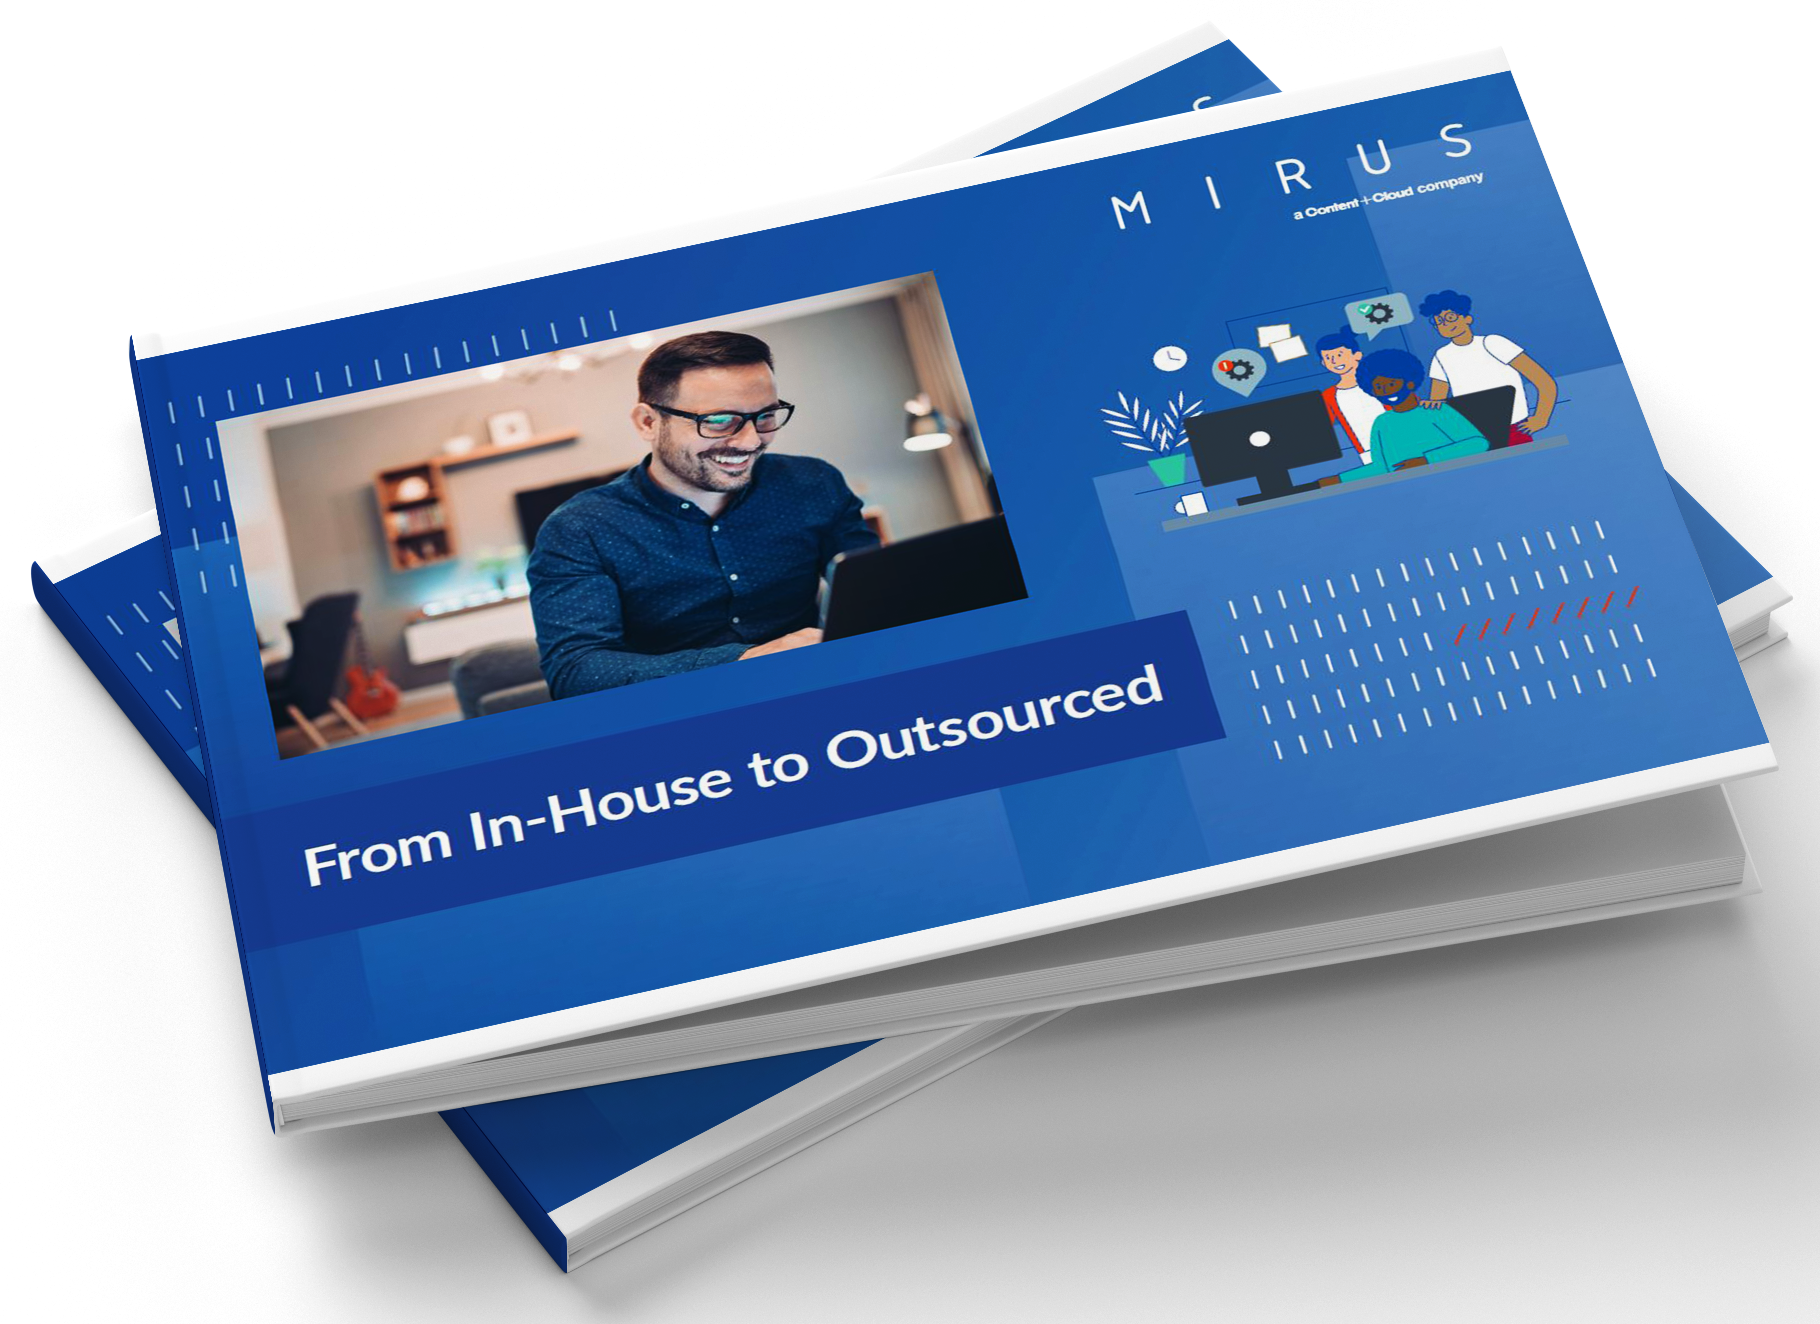 In-house or outsourcing_eBook_Mockup 2 (no background)